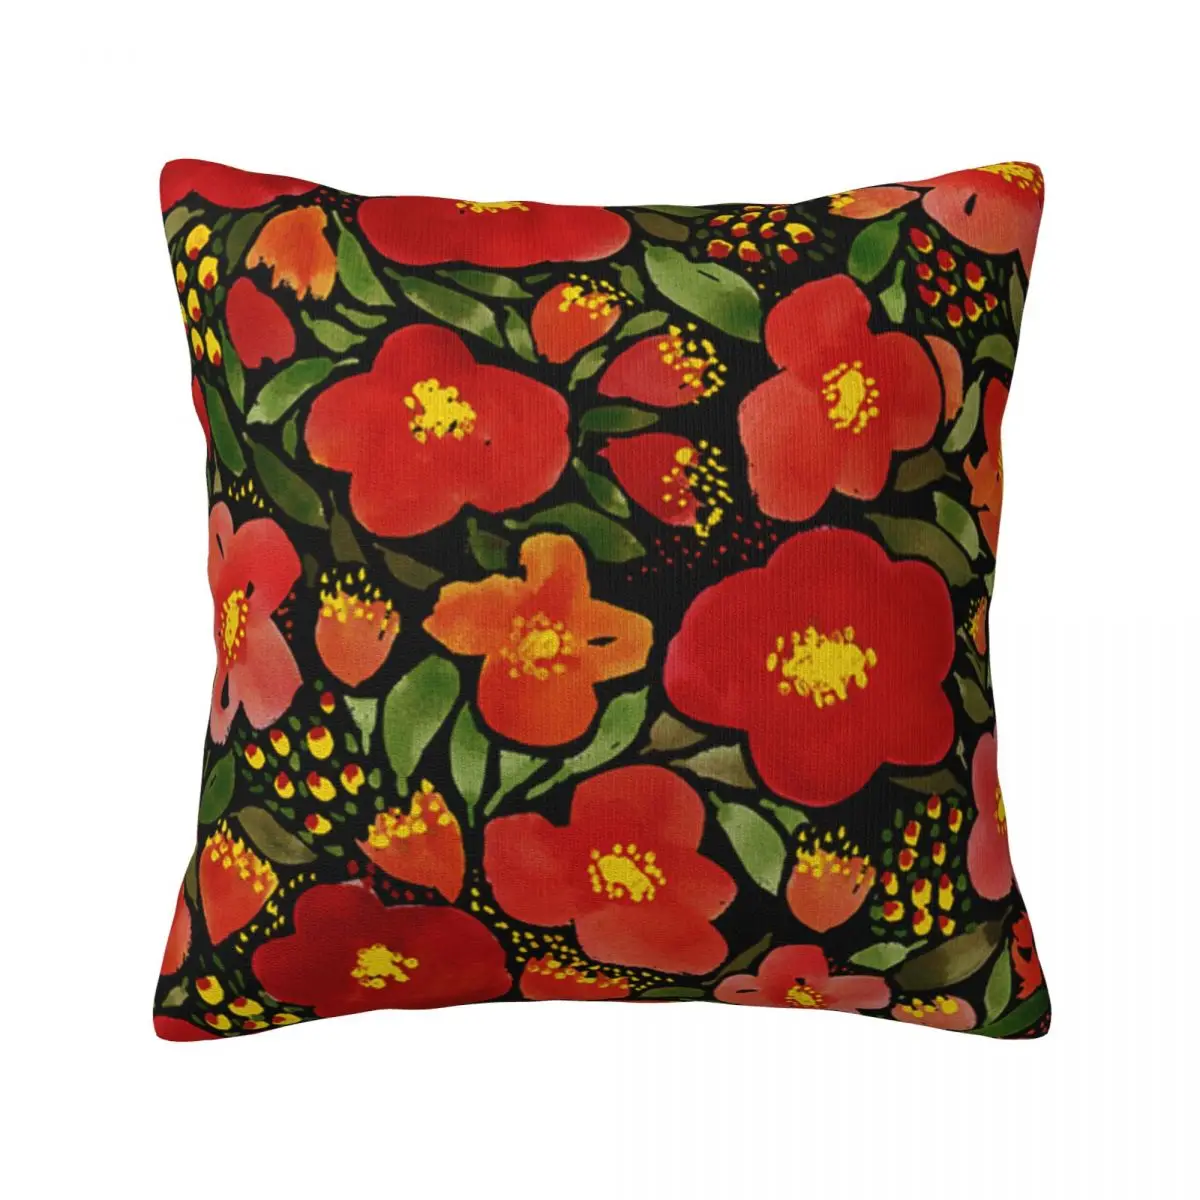 

Watercolor Red Poppy Flower Throw Pillow Cover Decorative Pillow Covers Home Pillows Shells Cushion Cover Zippered Pillowcase